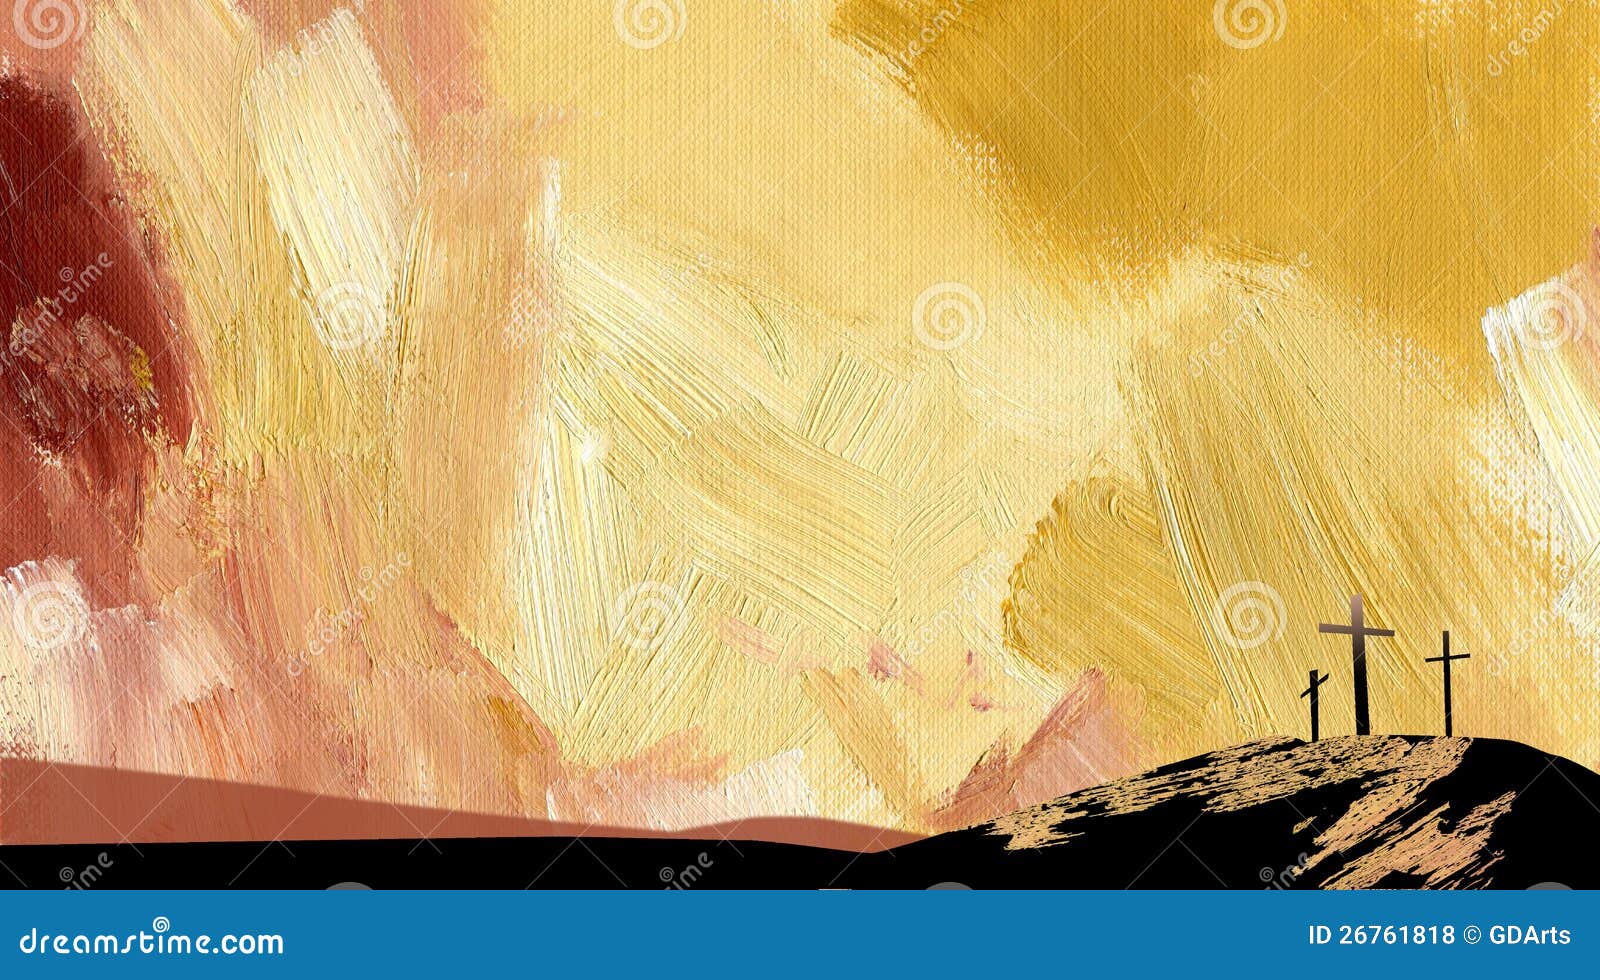 graphic abstract background calvary cross yellow